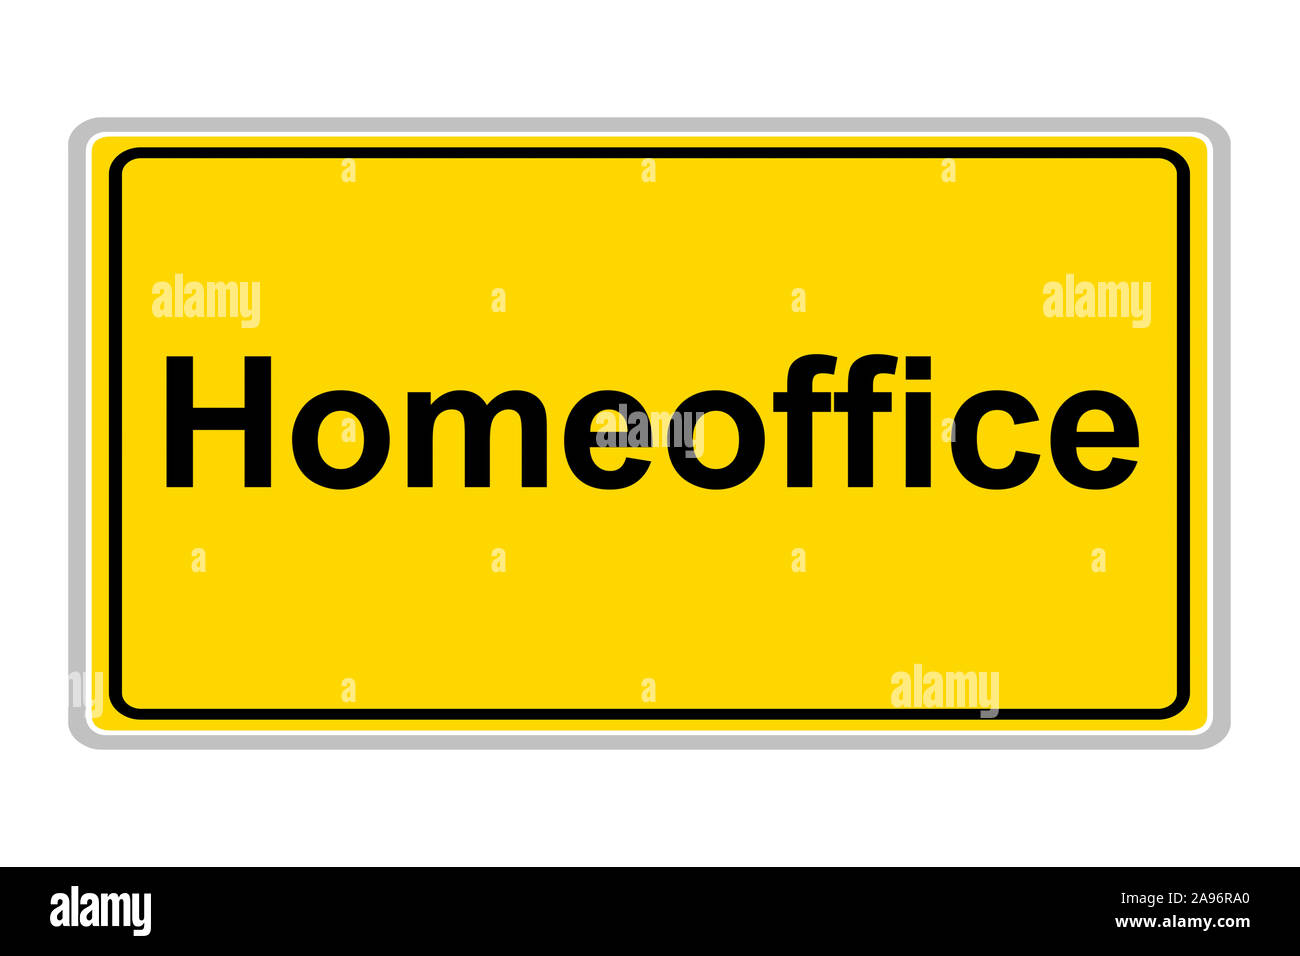 Homeoffice sign against white background Stock Photo